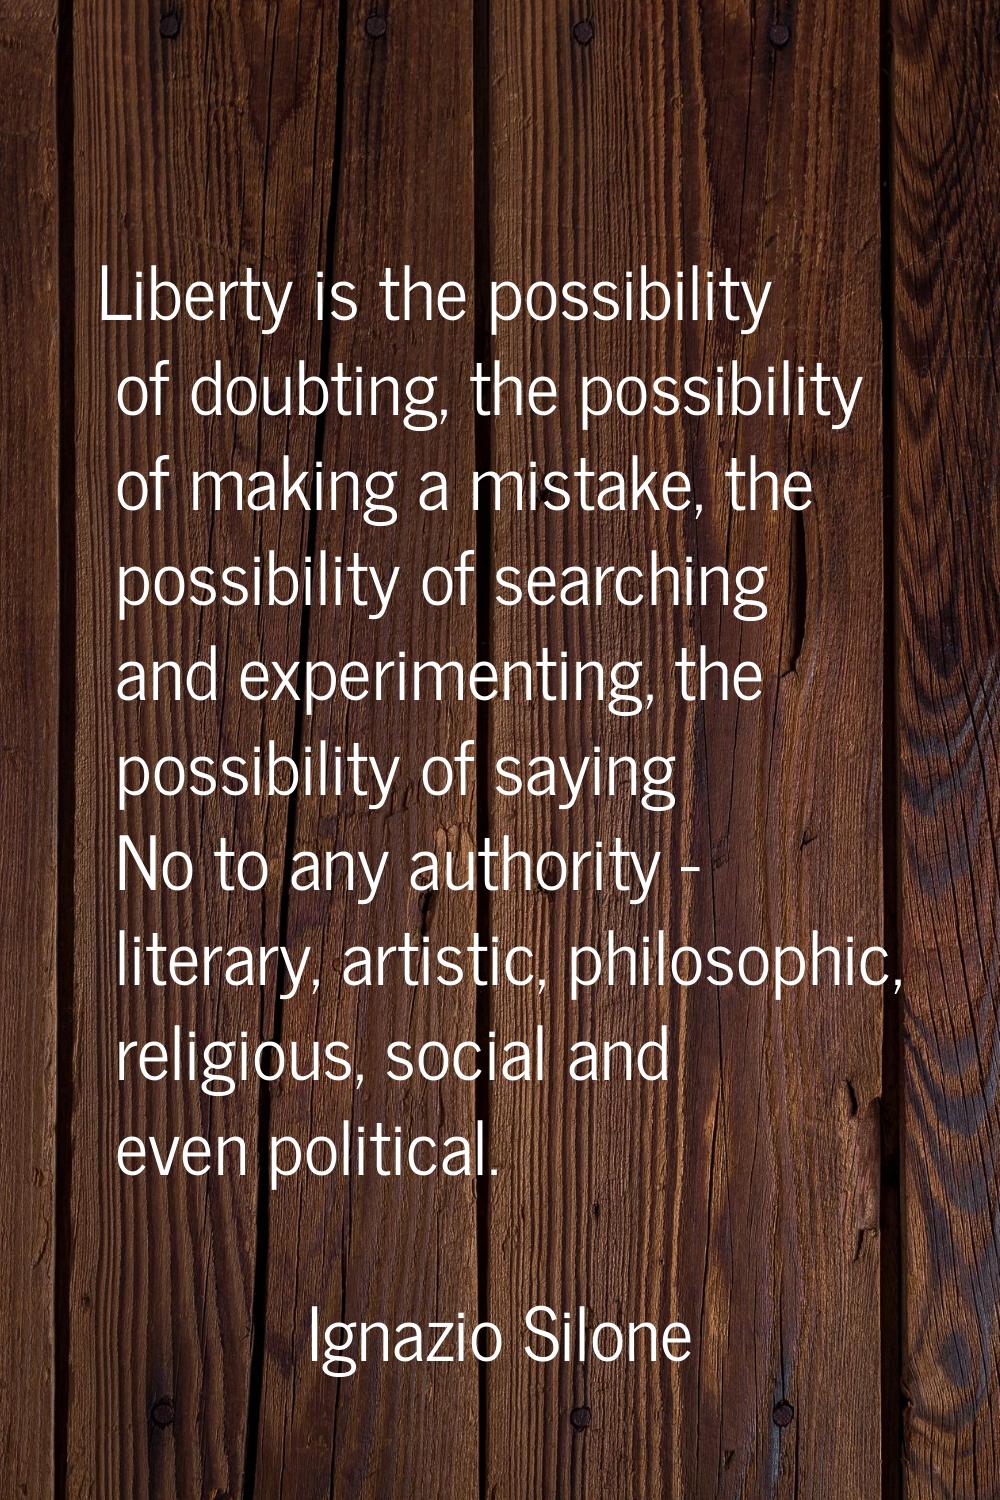 Liberty is the possibility of doubting, the possibility of making a mistake, the possibility of sea